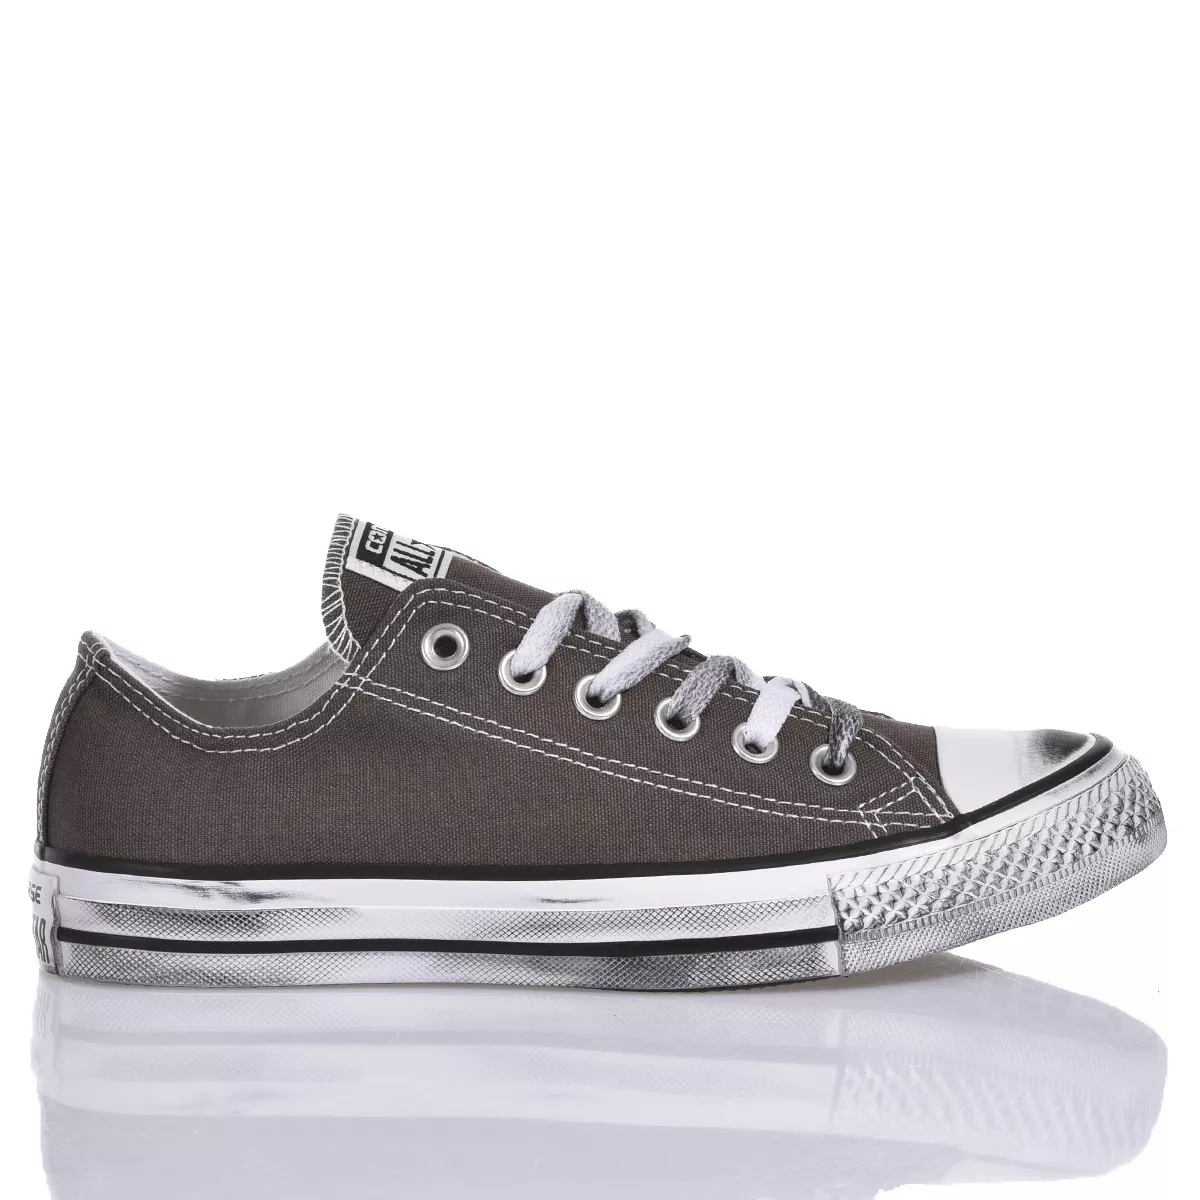 CONVERSE VINTAGE CHARCOAL OX  